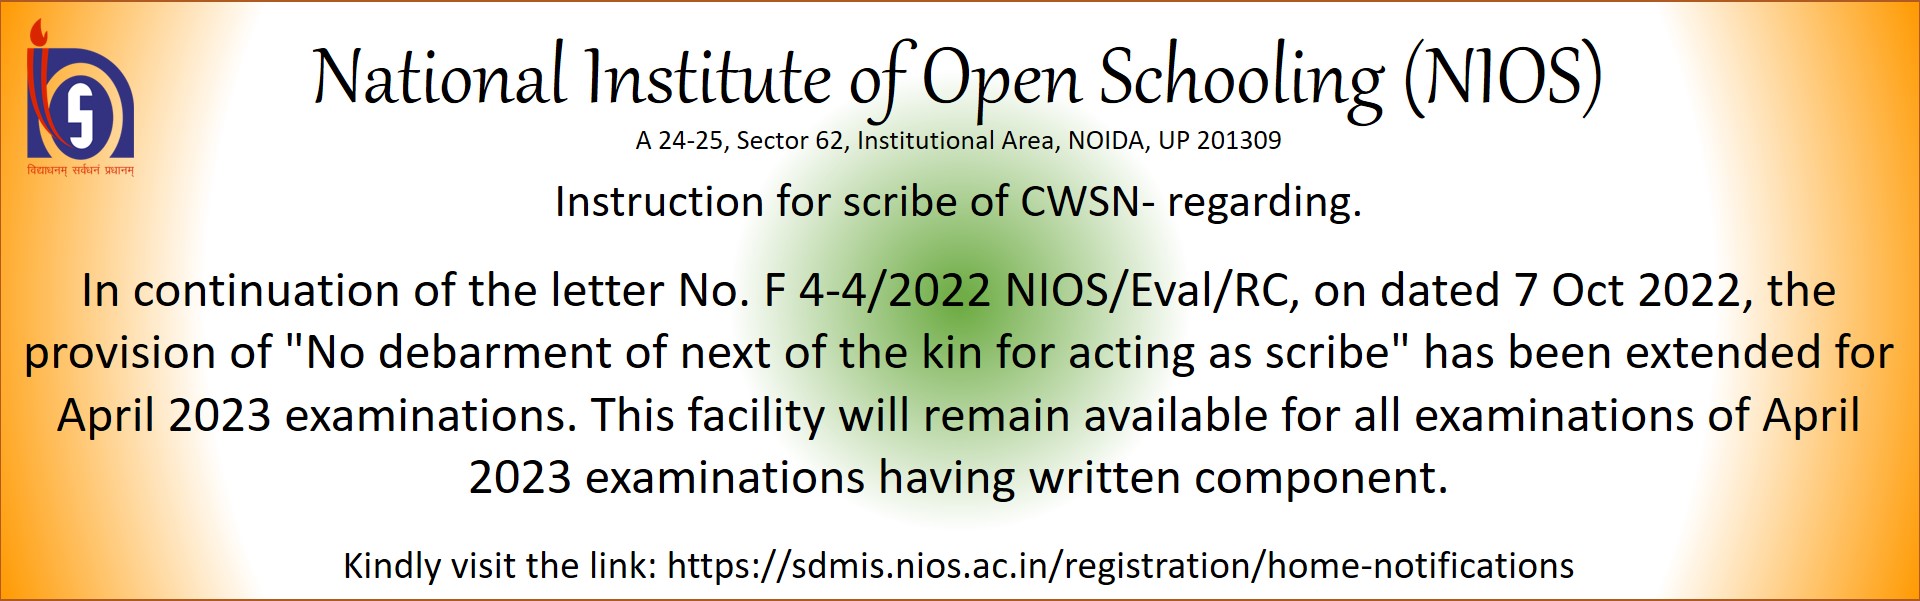 nios assignment submit last date 2021